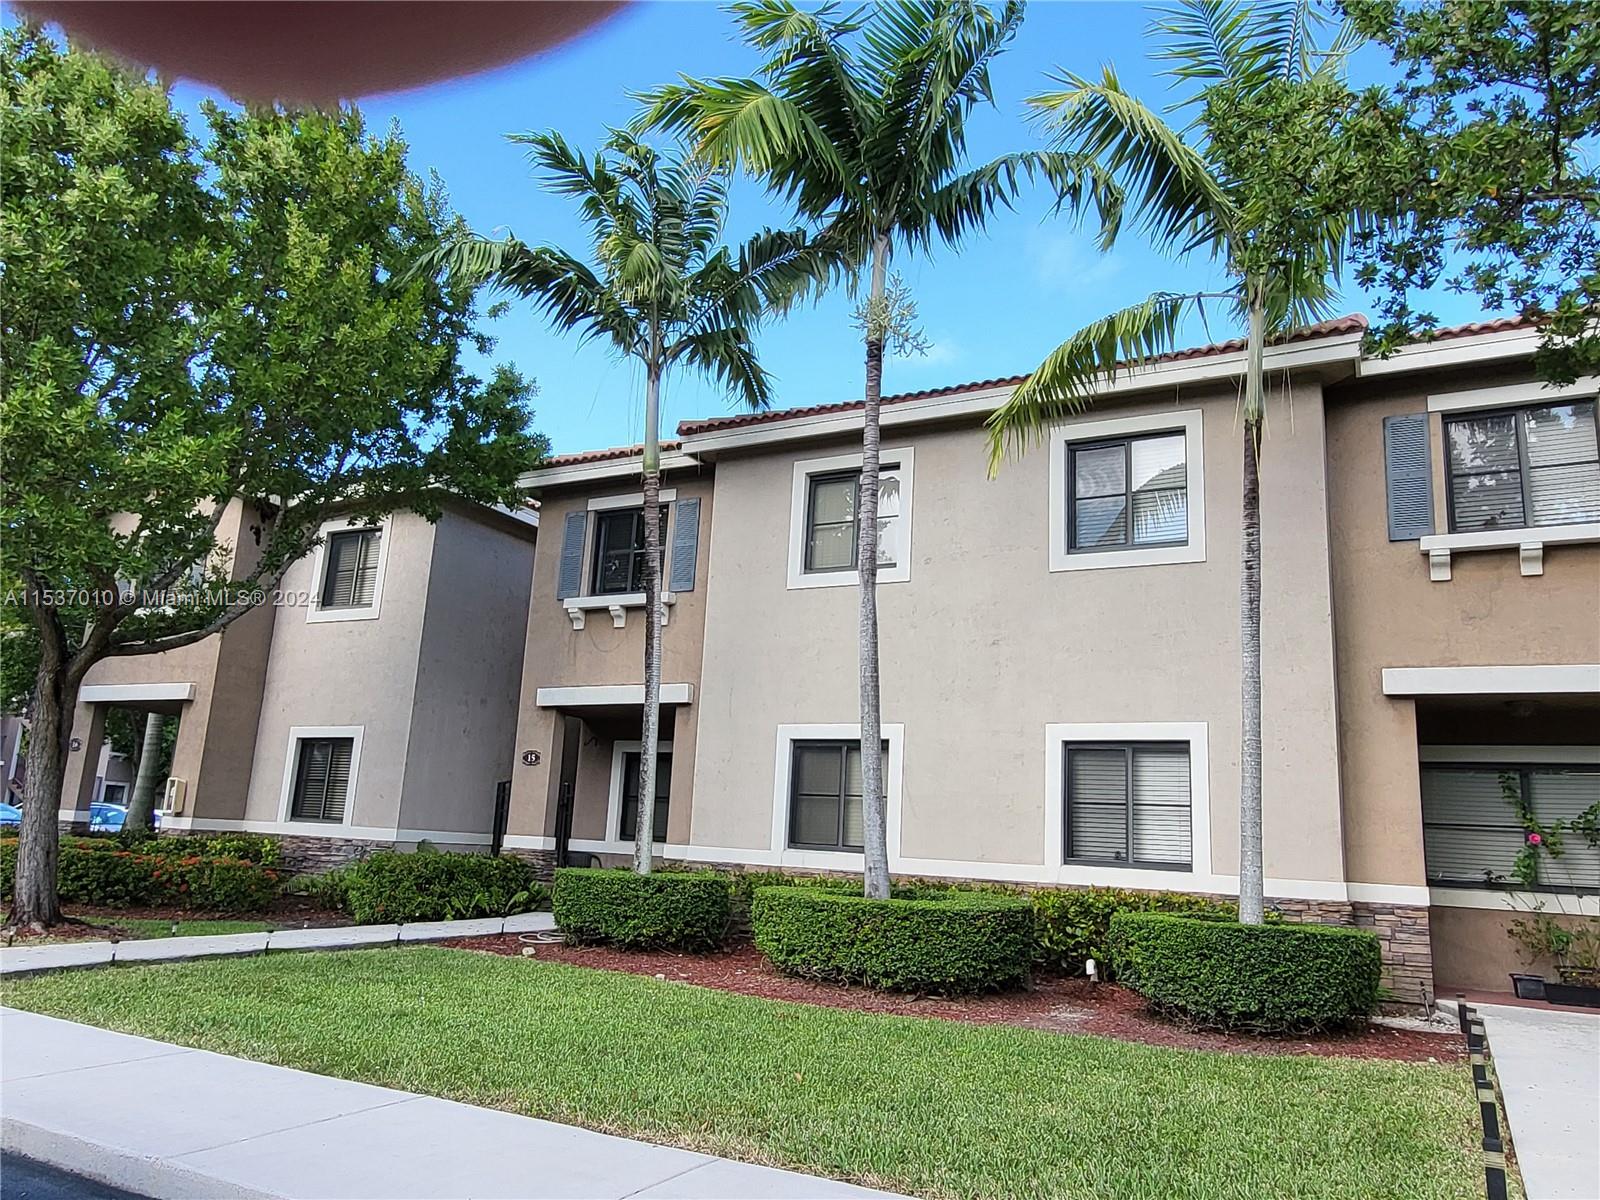 Beautiful 3/2.5 townhome at The Courts at Bayshore. Enjoy the resort style amenities of Bayshore. Freshly painted, new porcelain floors, stainless steal appliances, new countertops, laminate wood floors, lots of natural light.  Close to everything. Restaurants, shopping, schools.